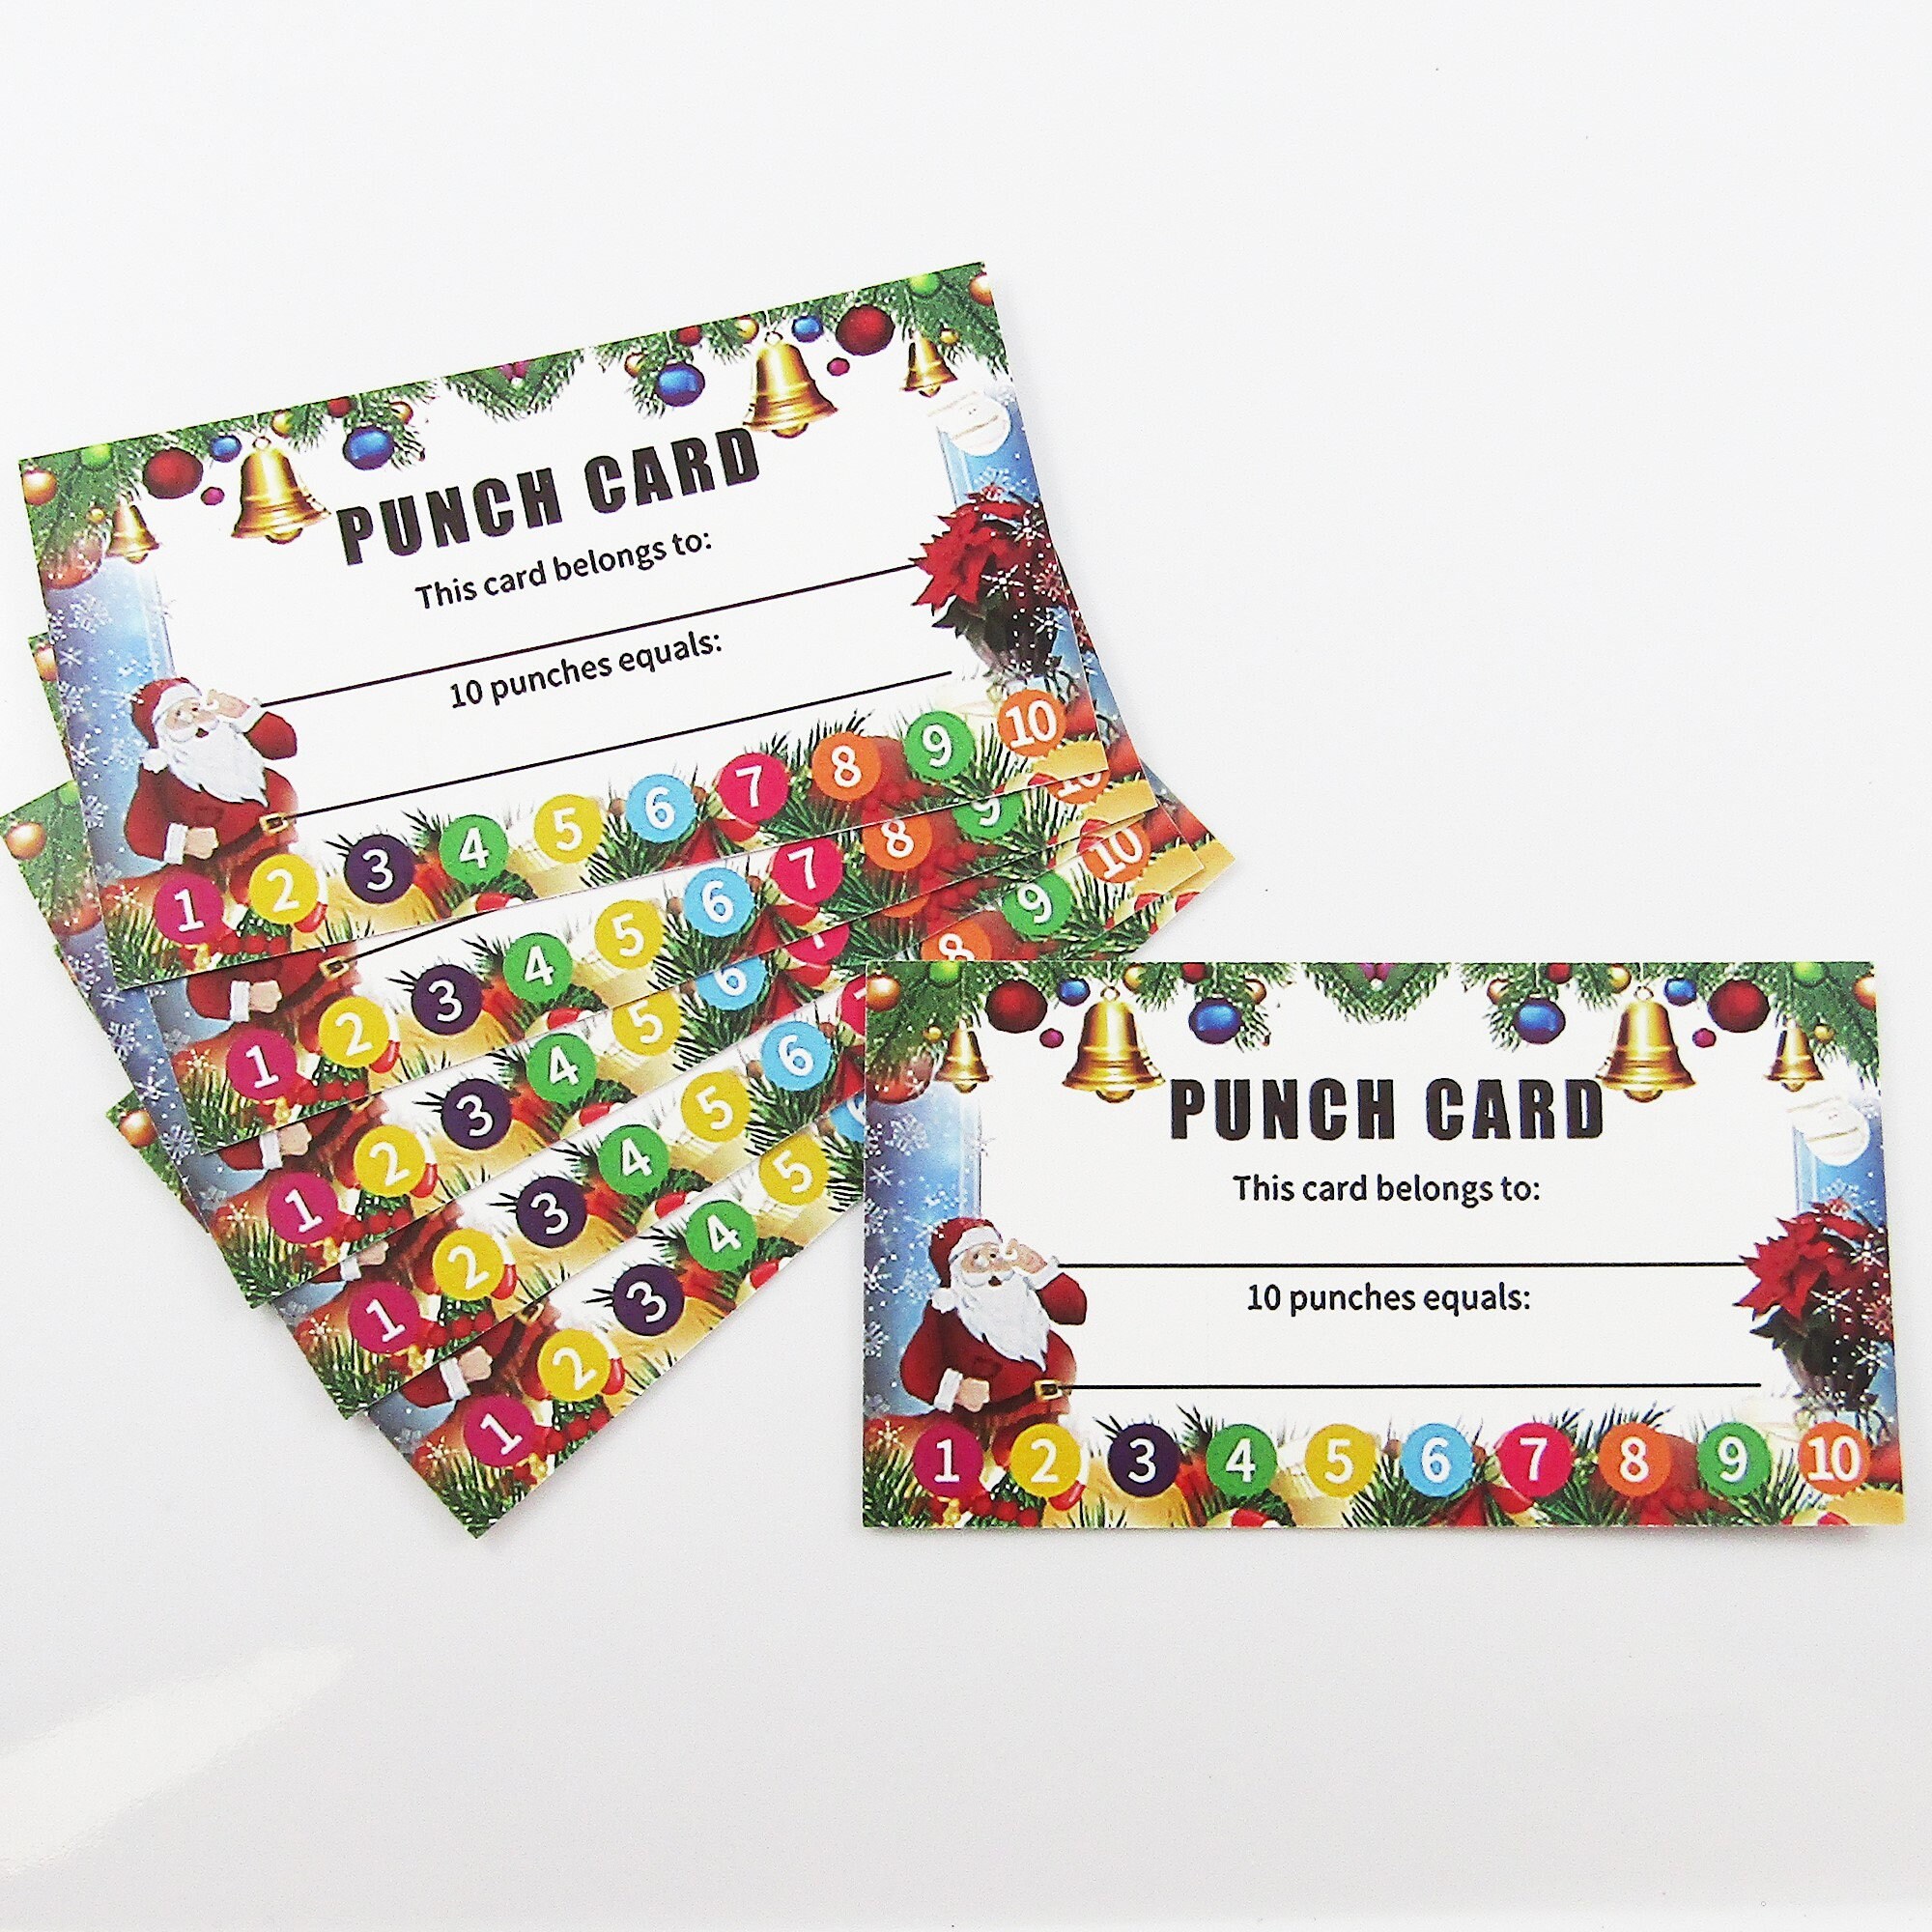 Rewards Punch Card * Small Business Loyalty Card * Set of 50 Cards *  English and Spanish Versions